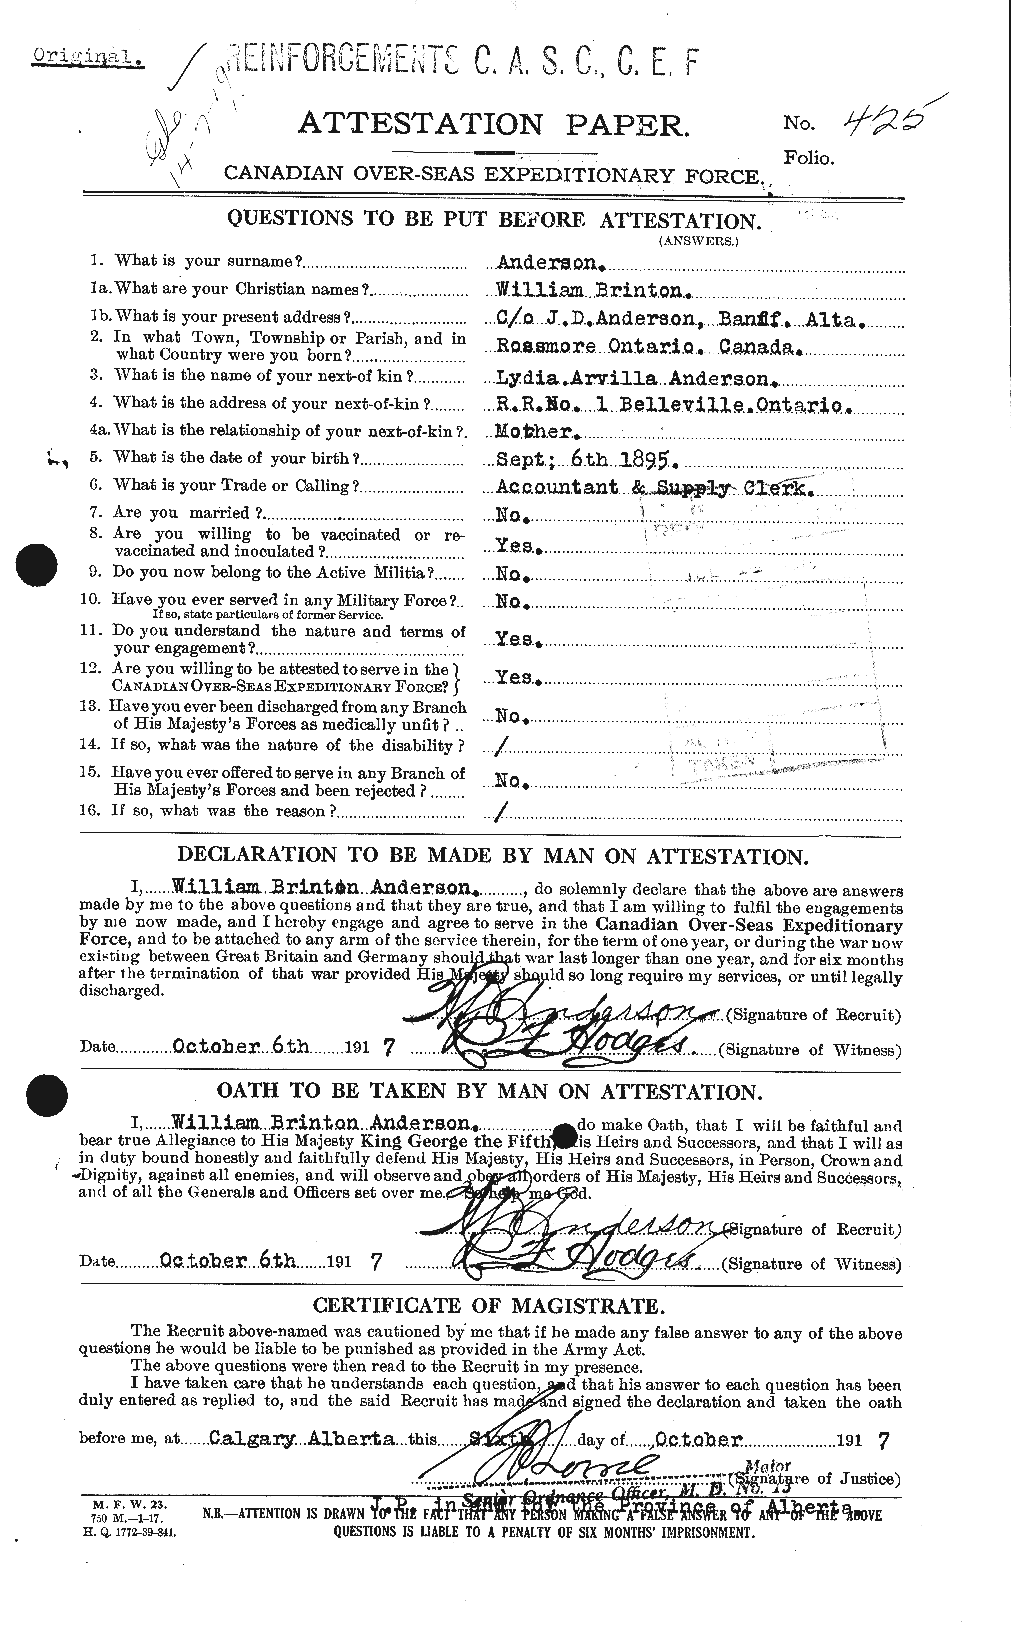 Personnel Records of the First World War - CEF 210737a